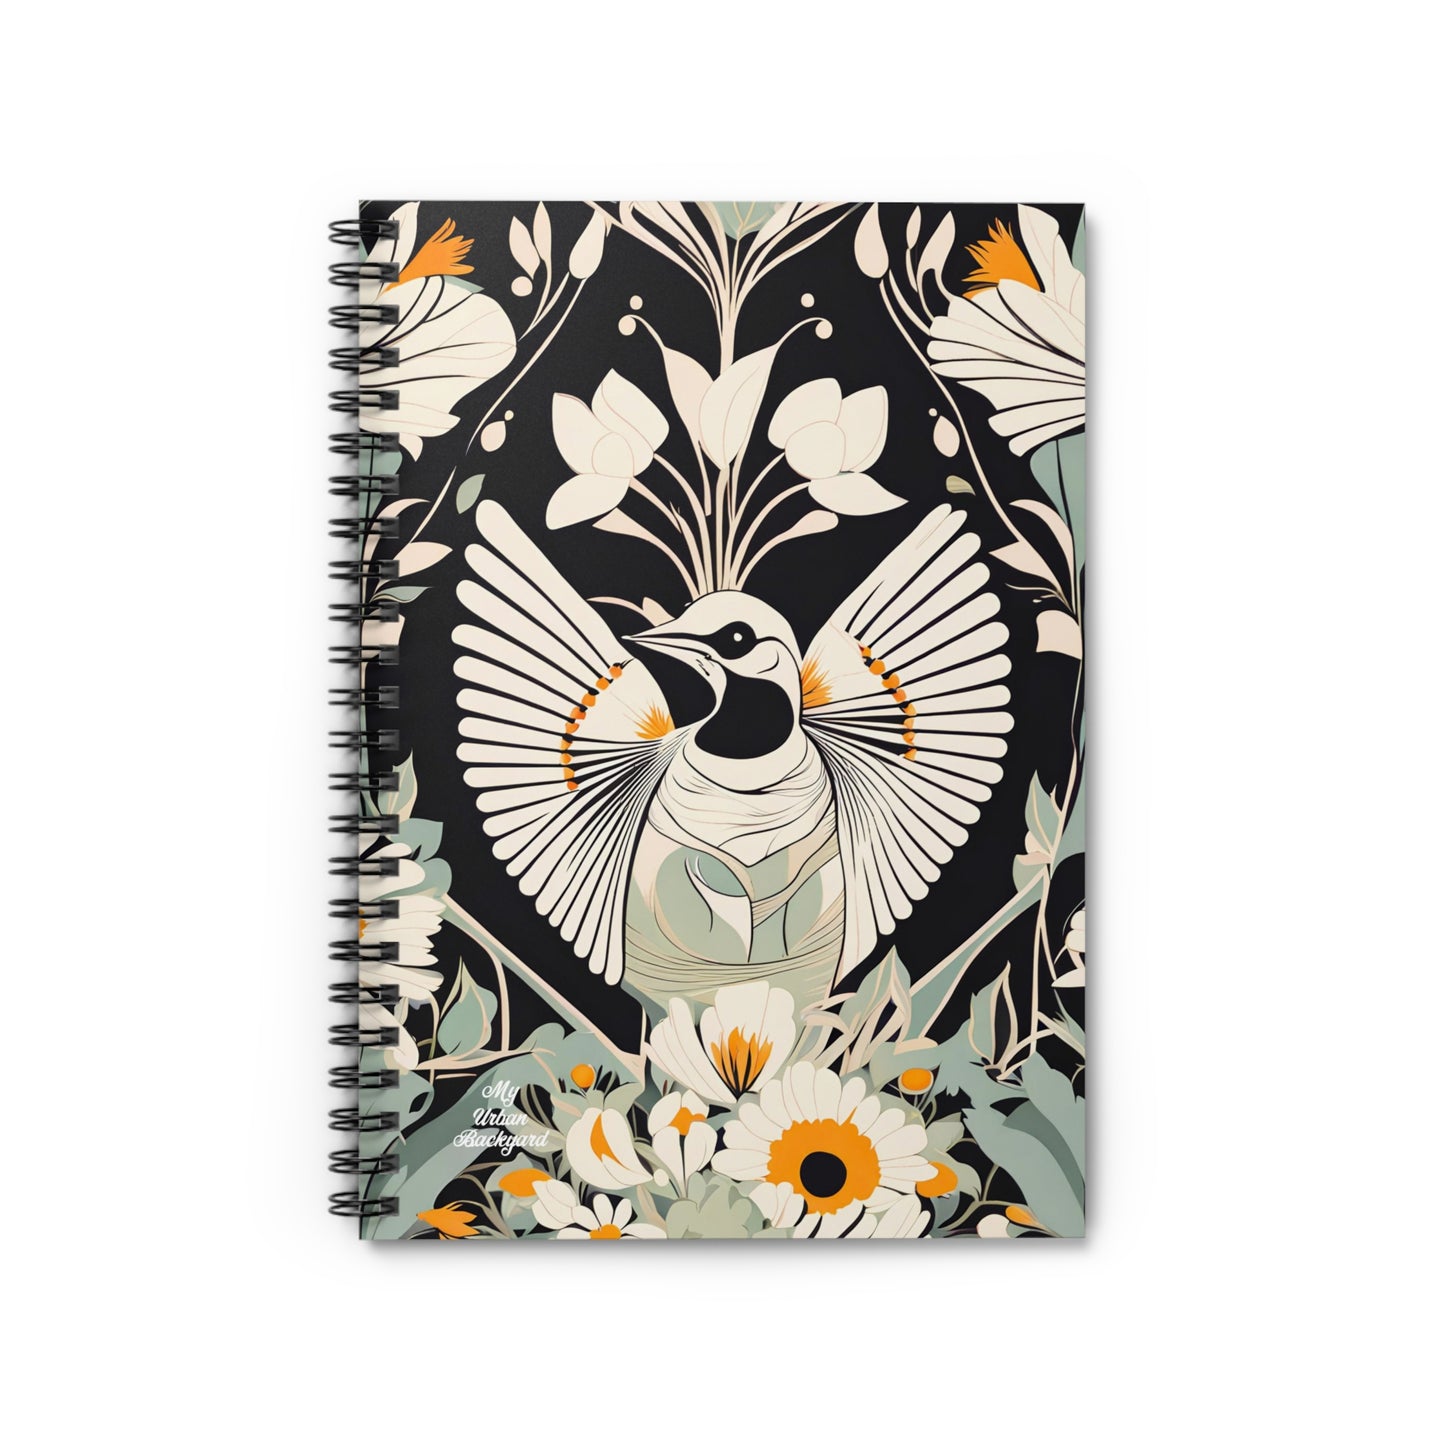 White Bird with Flowers, Spiral Notebook Journal - Write in Style